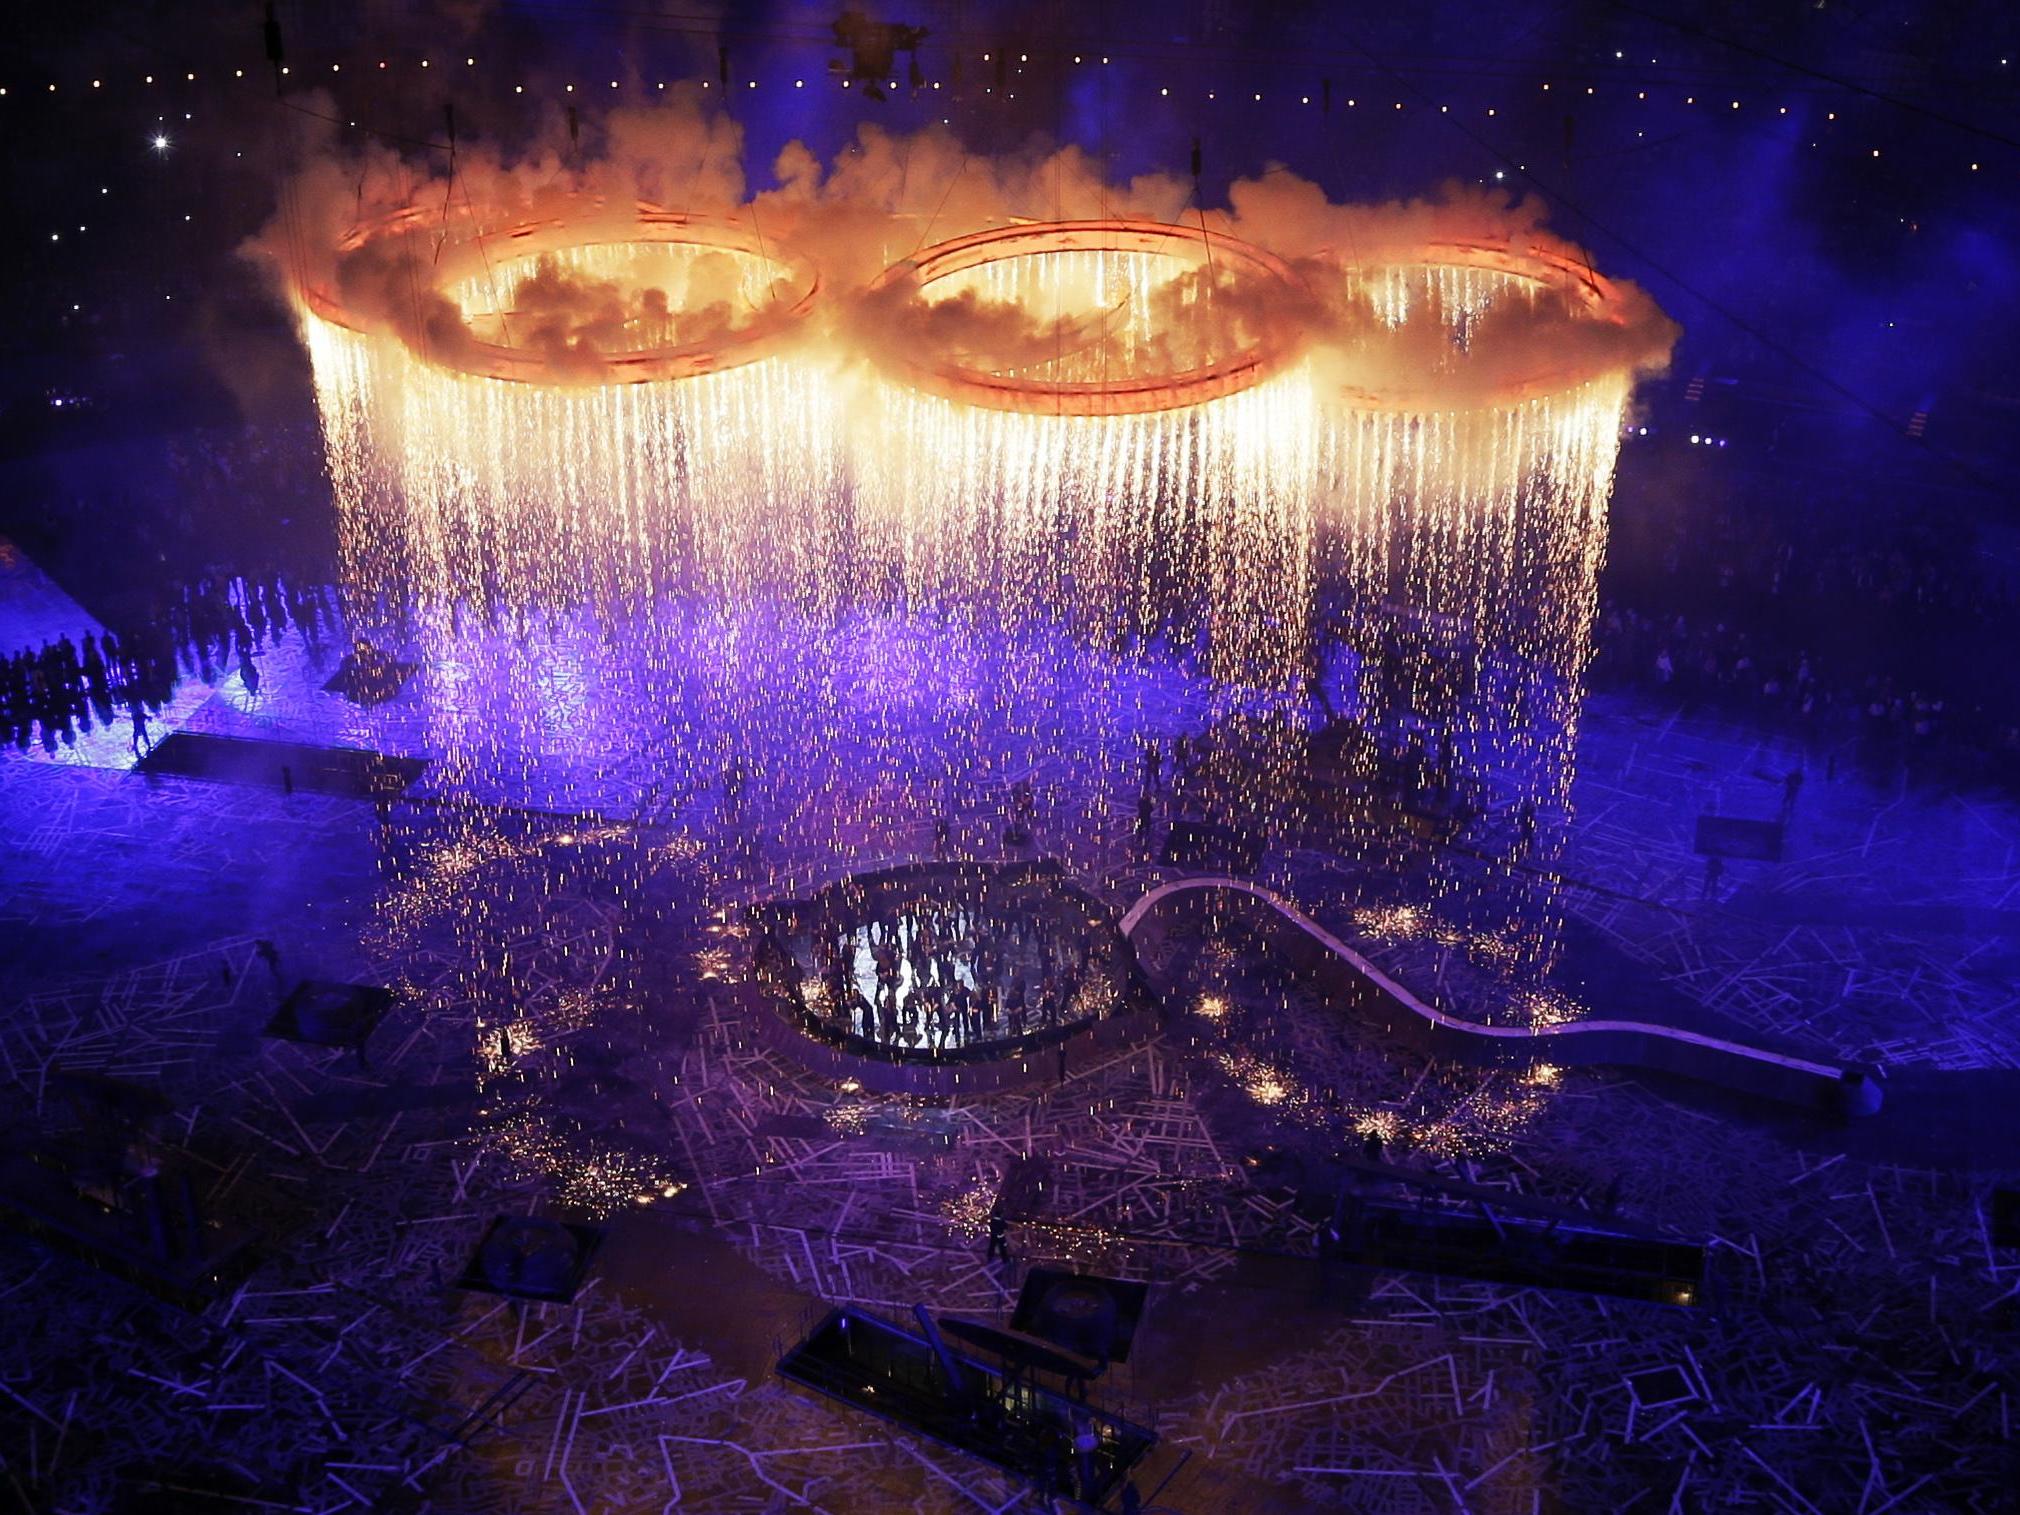 Rings representing the Olympics and the industrial revolution are lit during Danny Boyle's 2012 opening ceremony